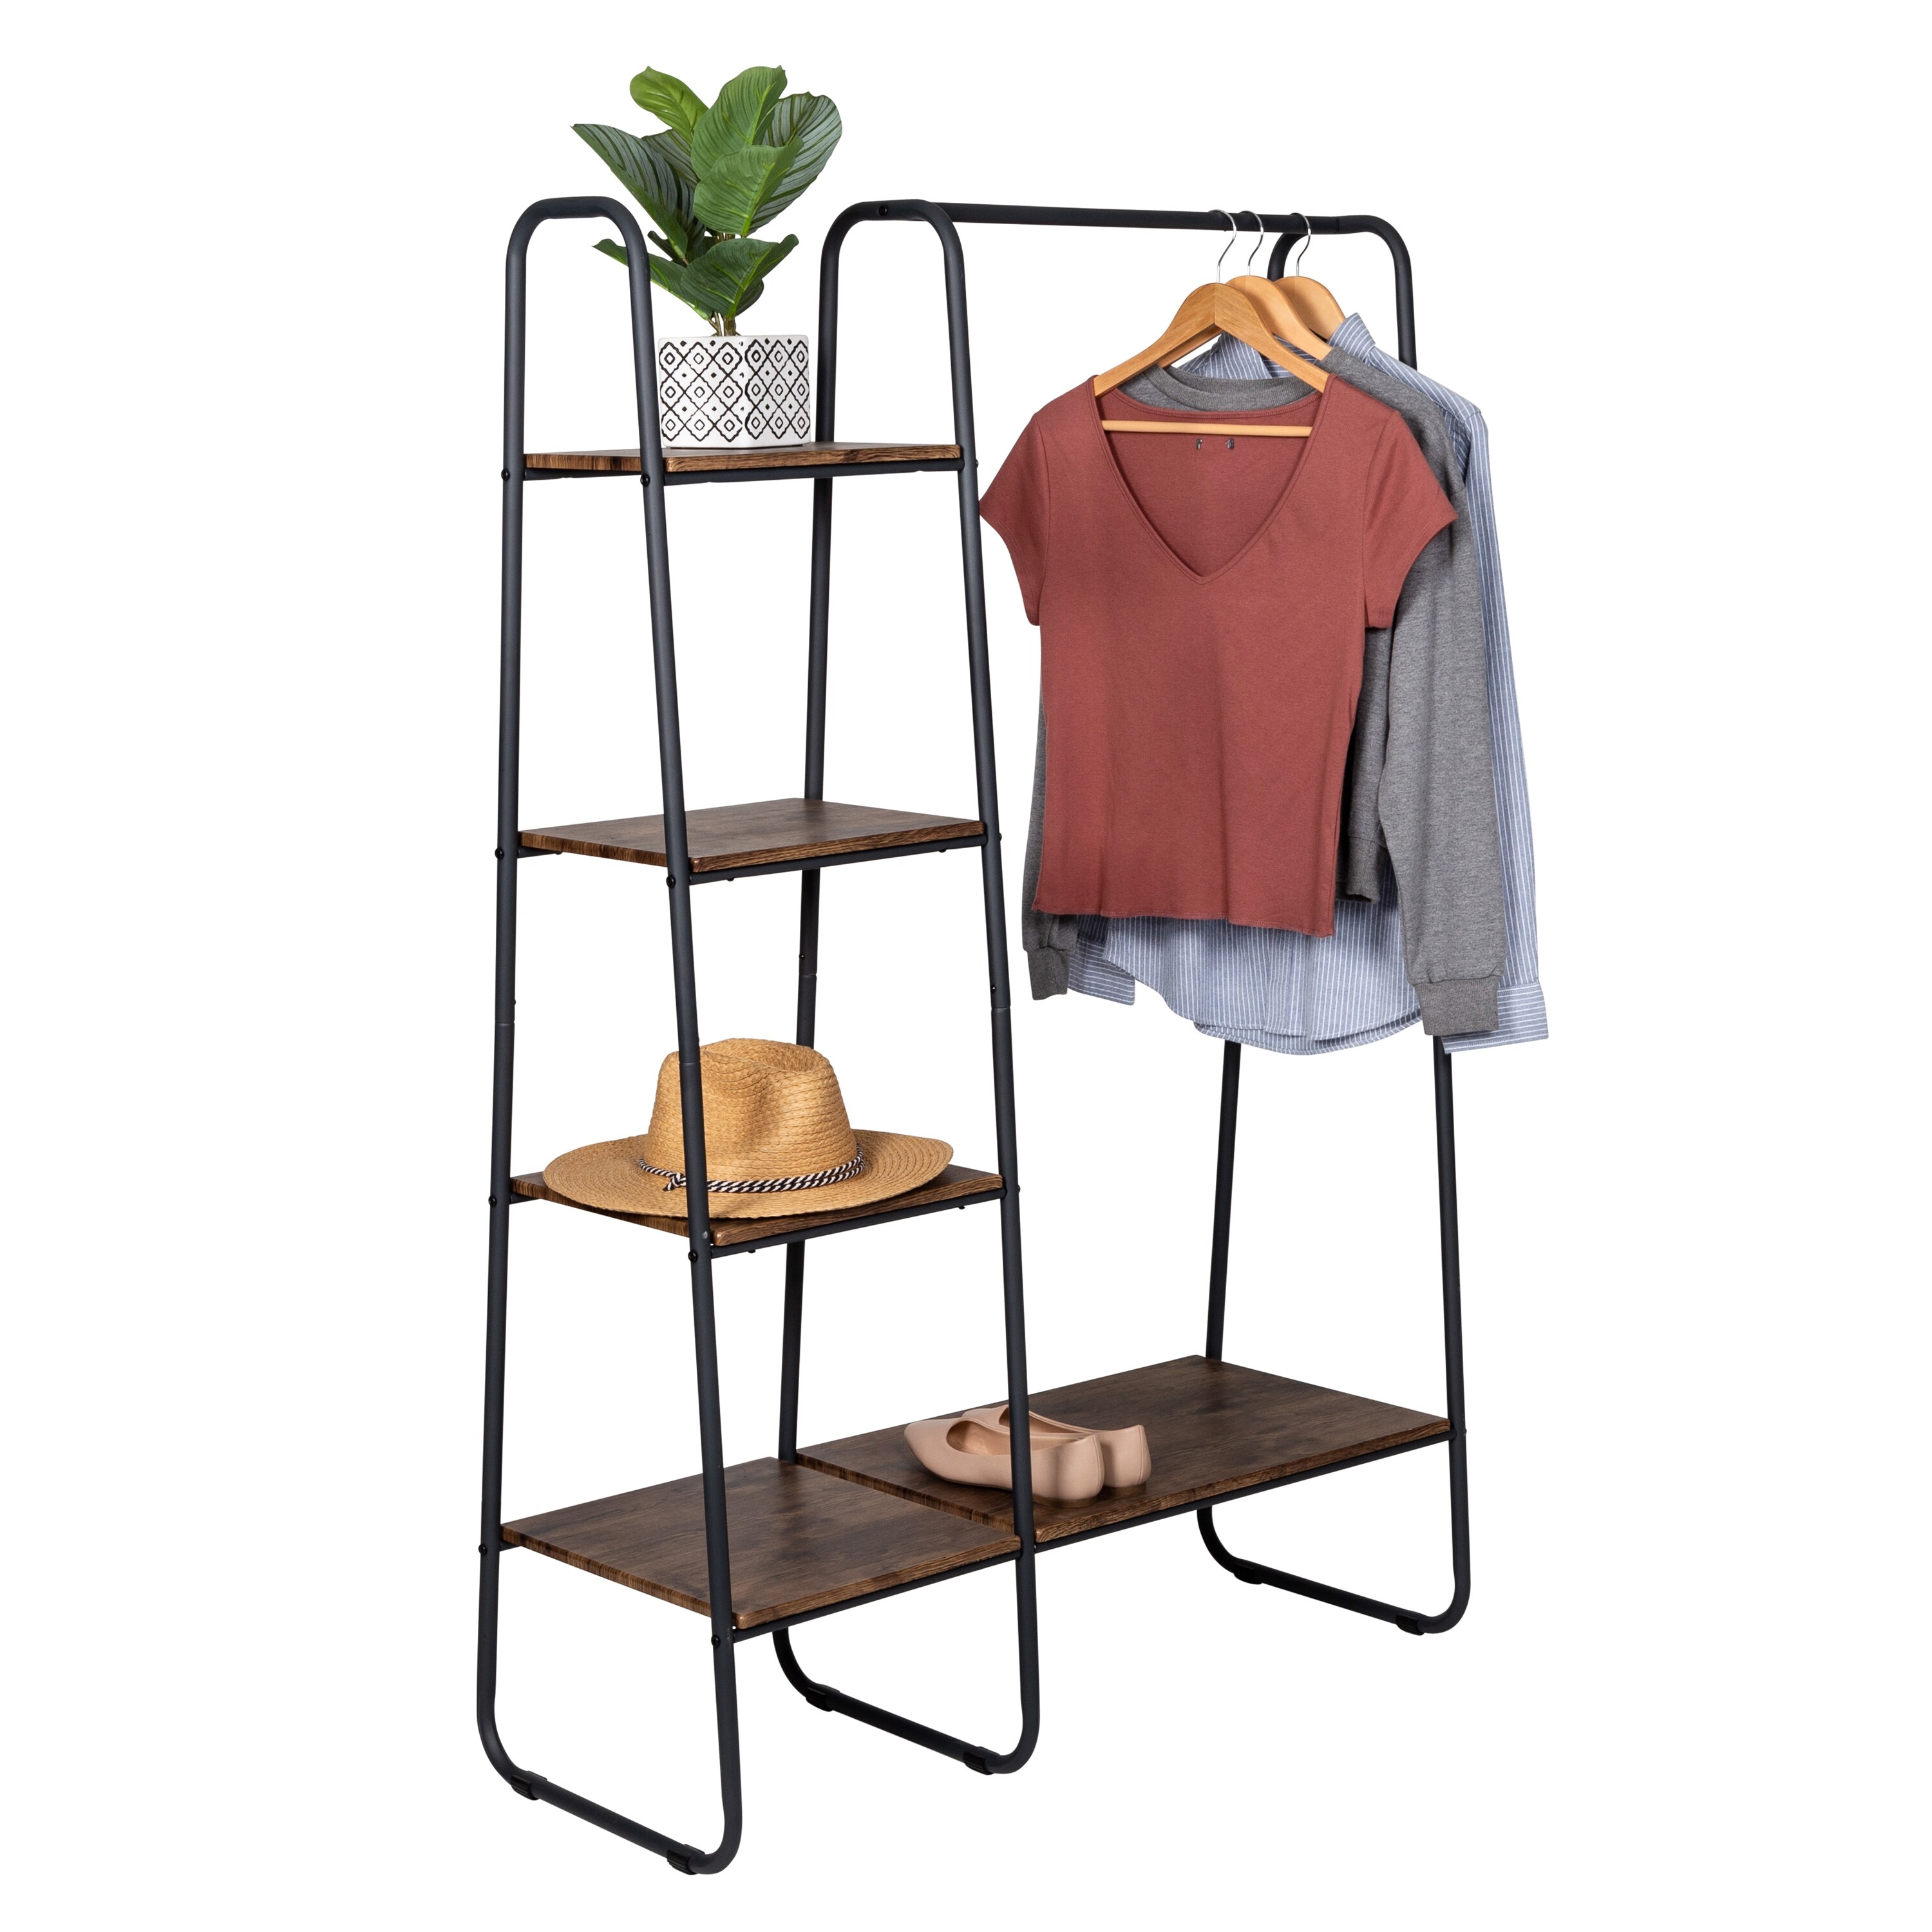 LULU clothes stand / free standing clothes rail - wooden & metal